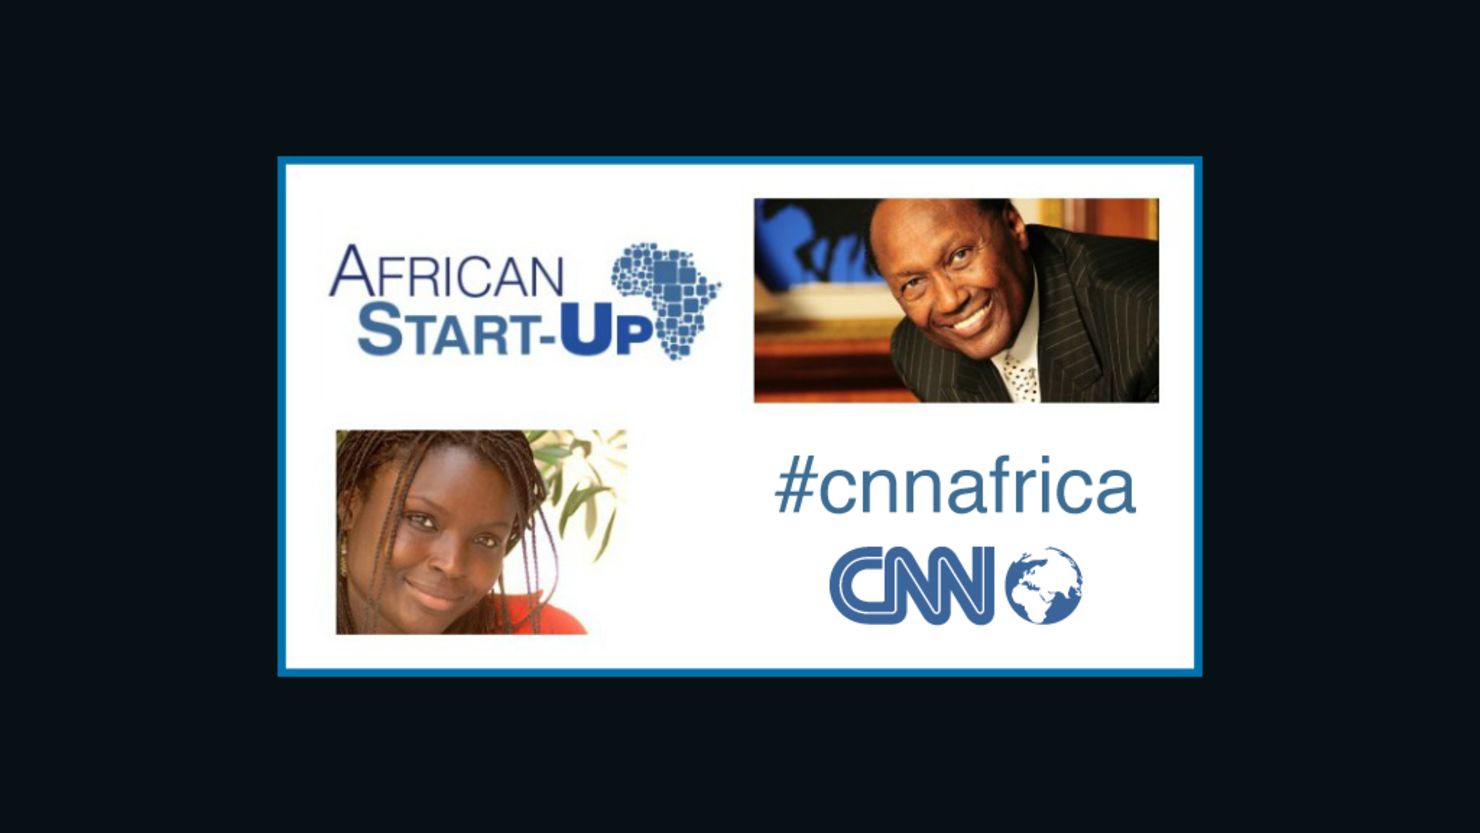 Business leaders Magatte Wade and Chris Kirubi will join African Start-Up's Tweetchat on entrepreneurship in the continent.